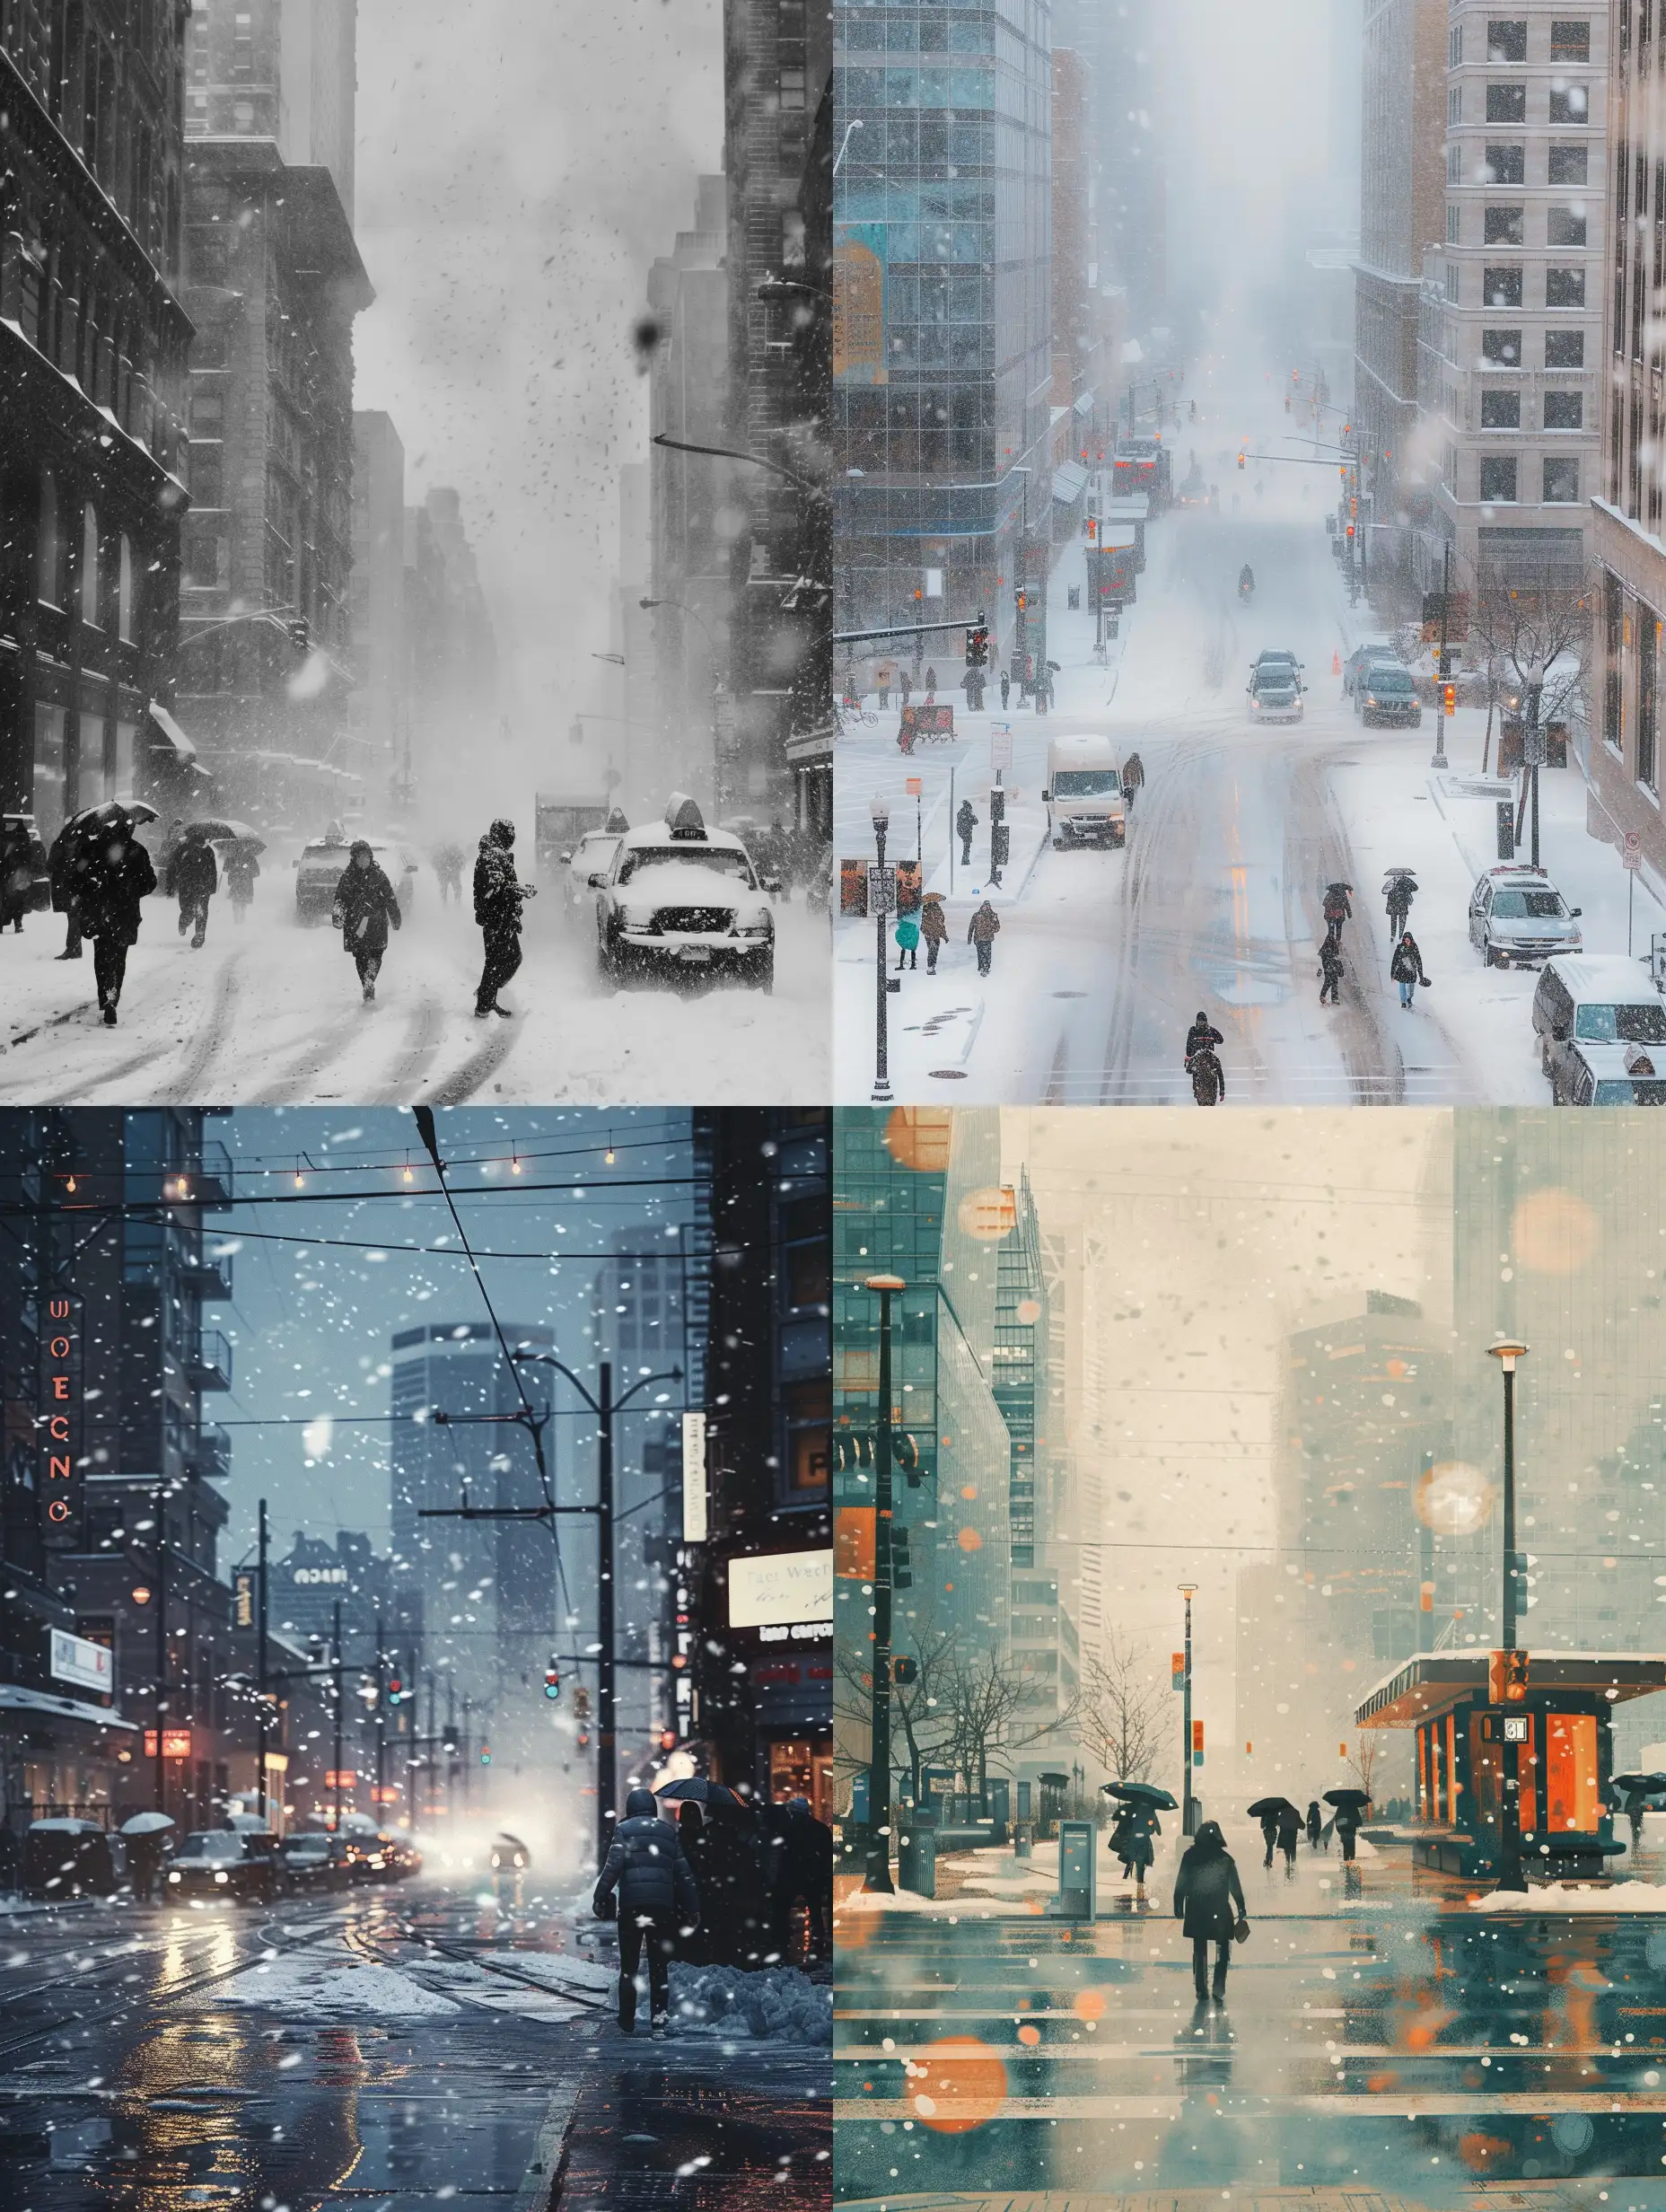 Bustling-Cityscape-During-January-Snowstorm